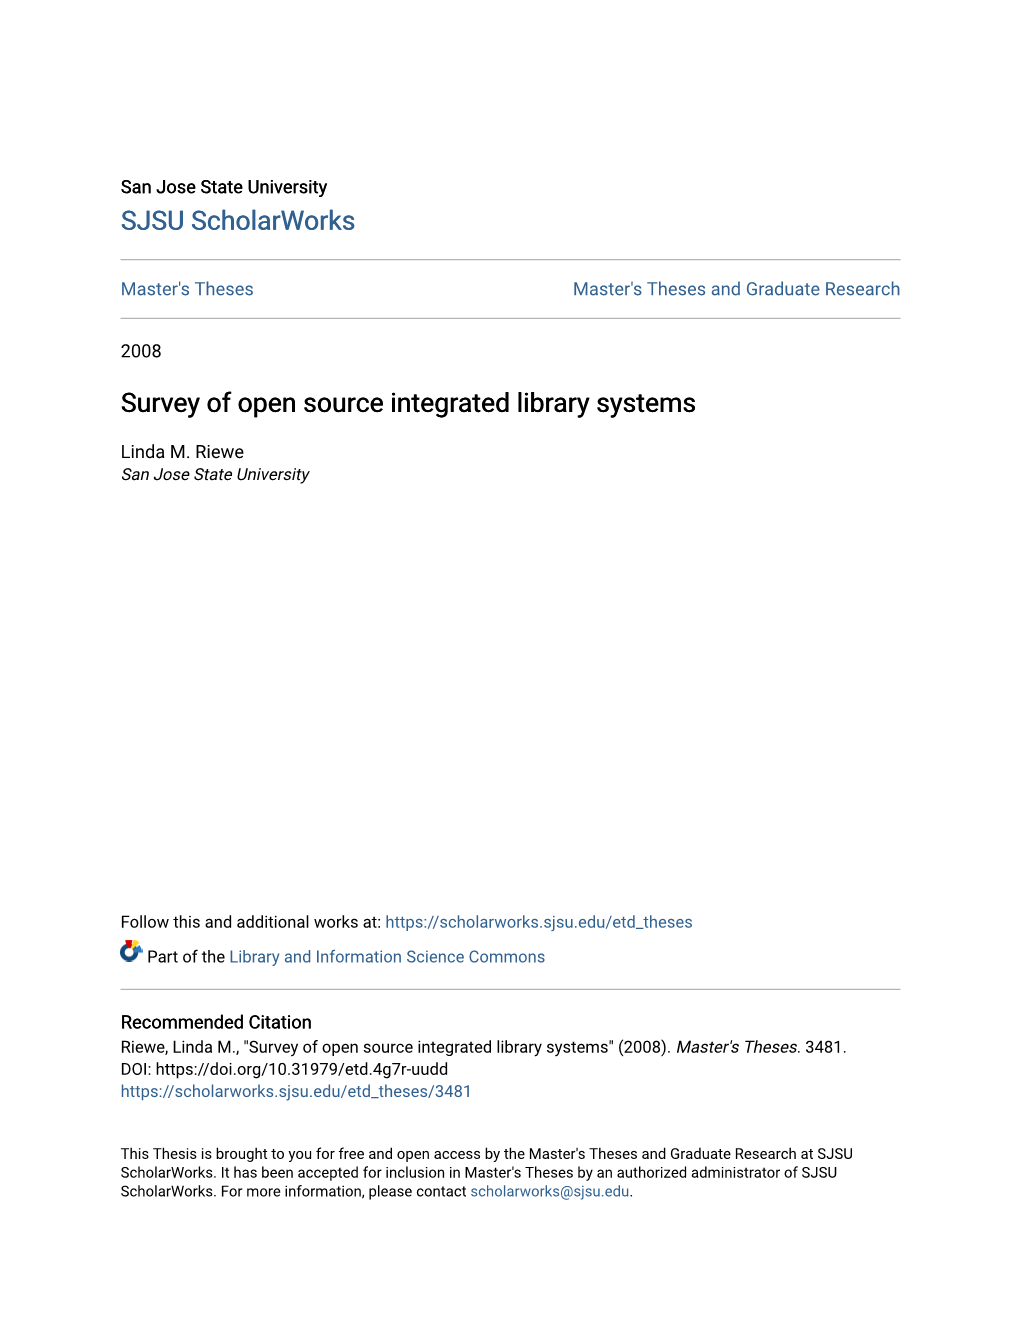 Survey of Open Source Integrated Library Systems